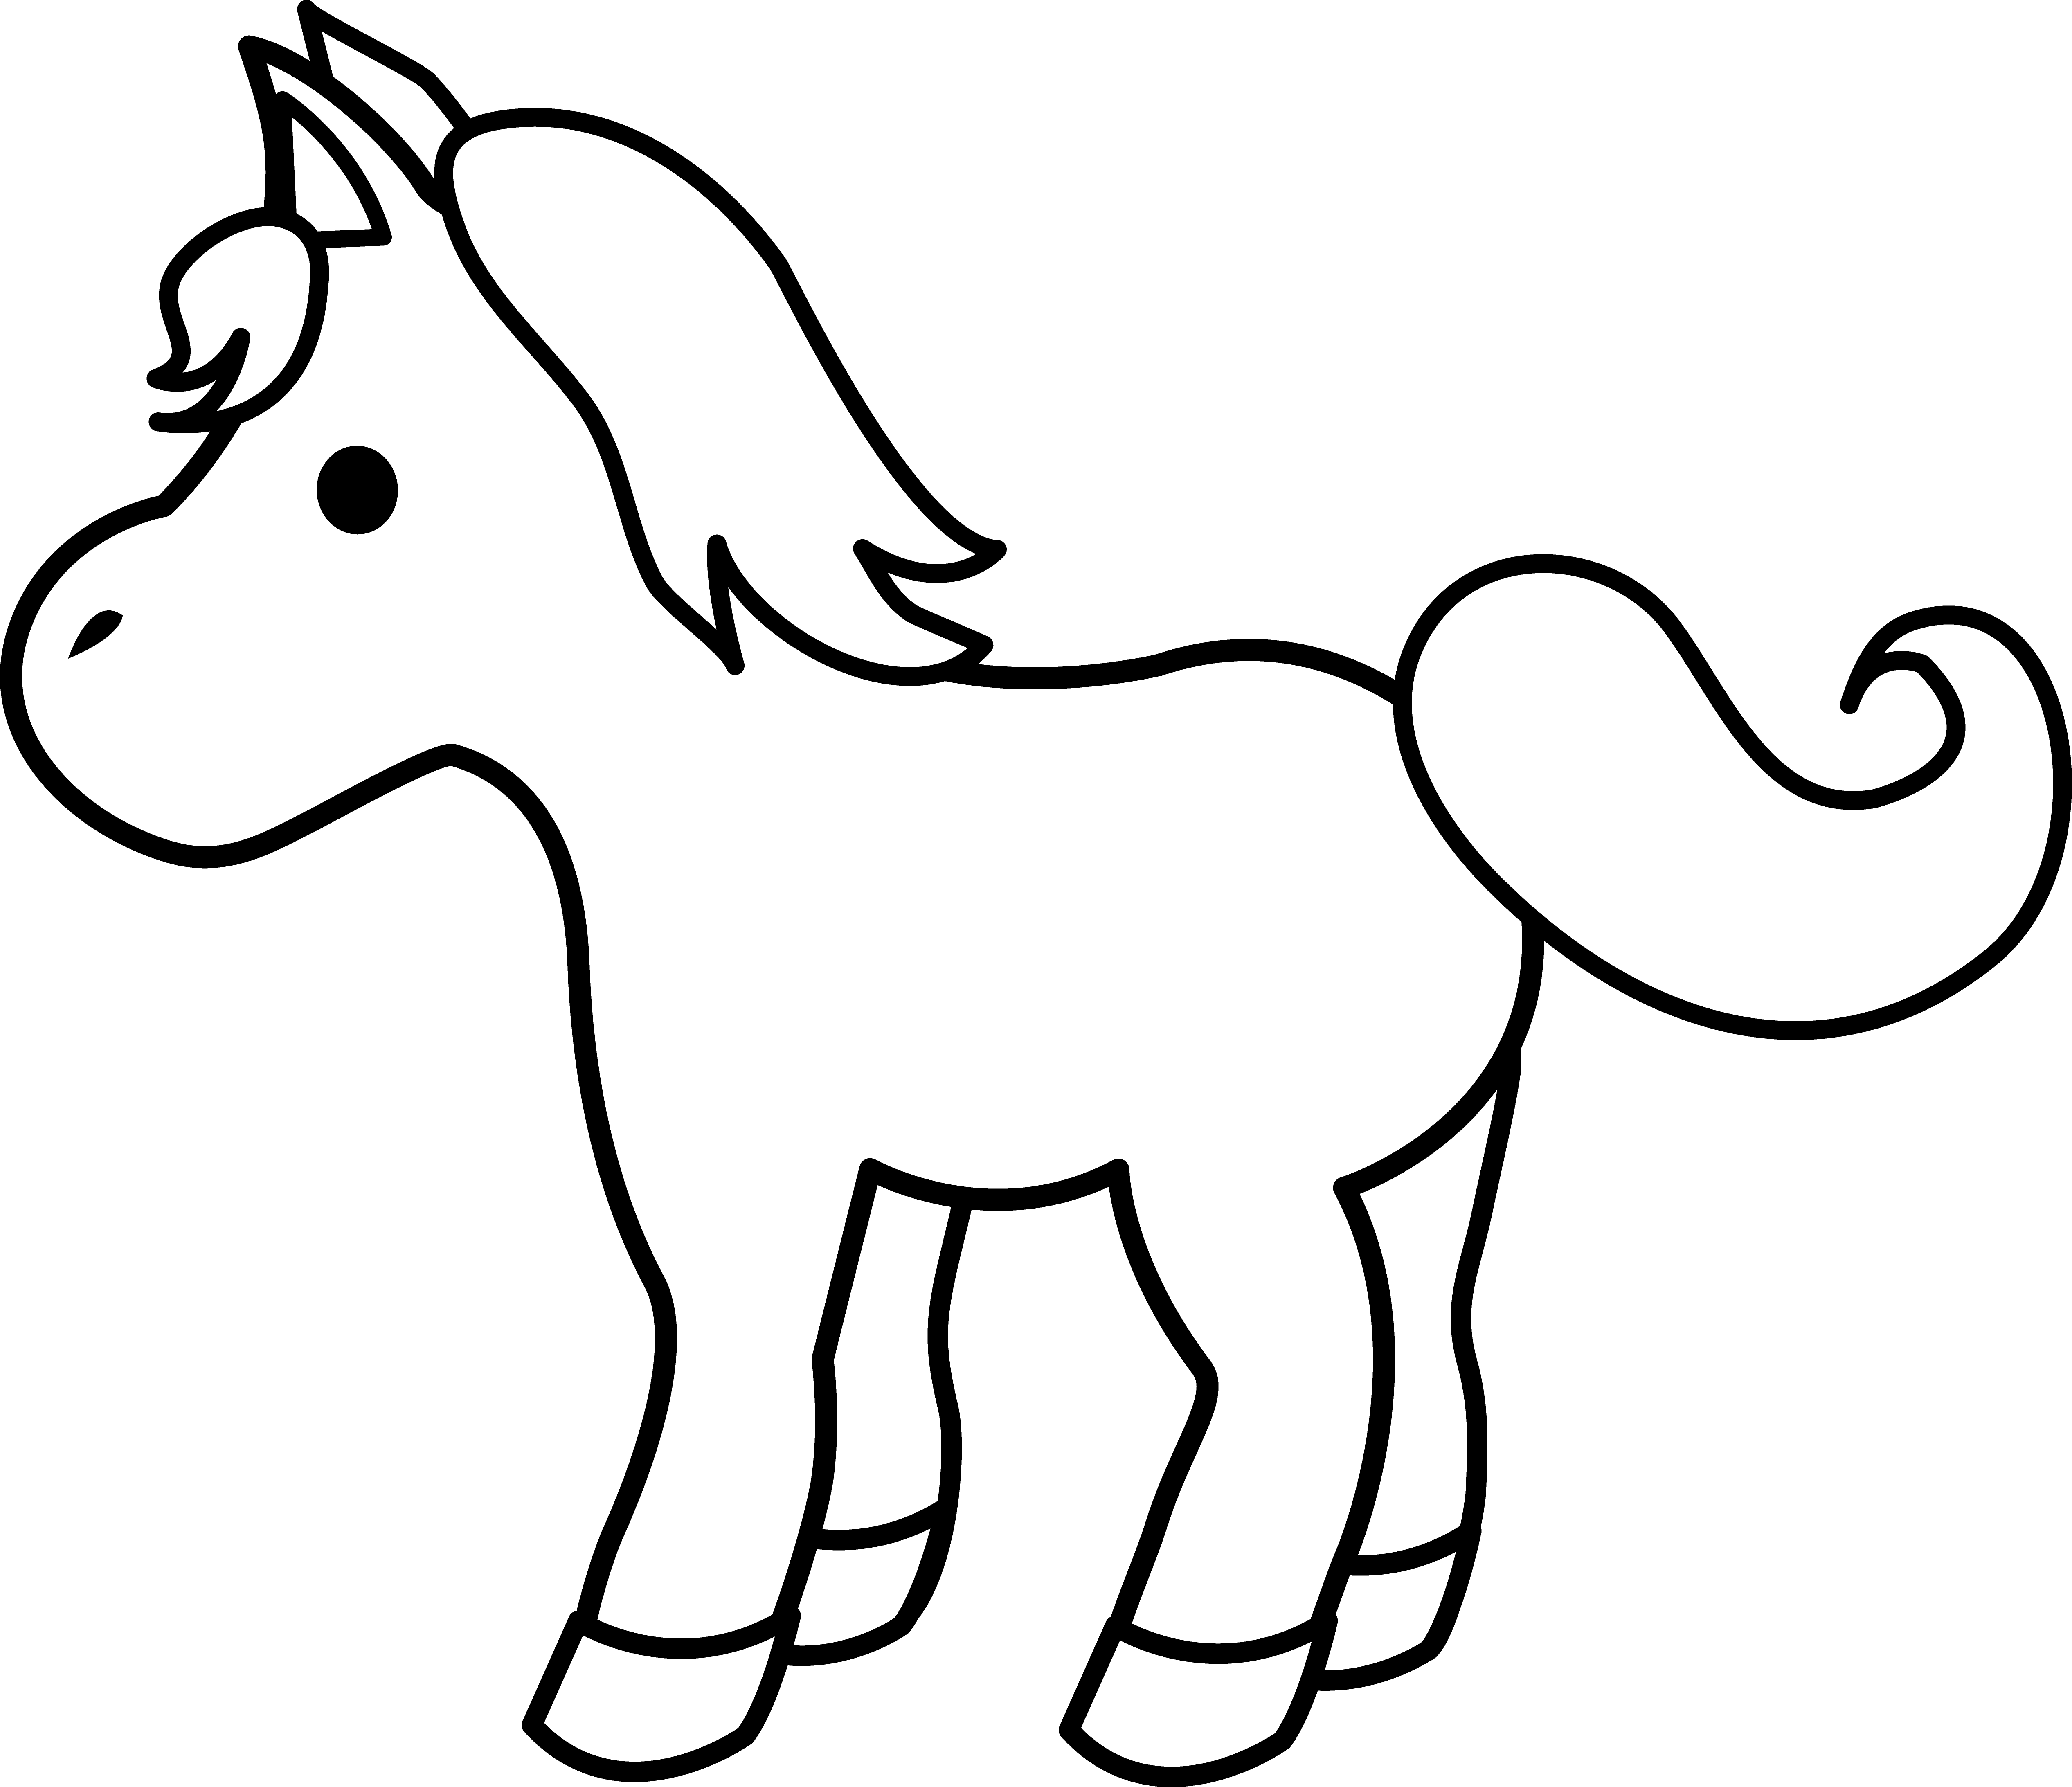 Free vector graphic: Foal, Ho